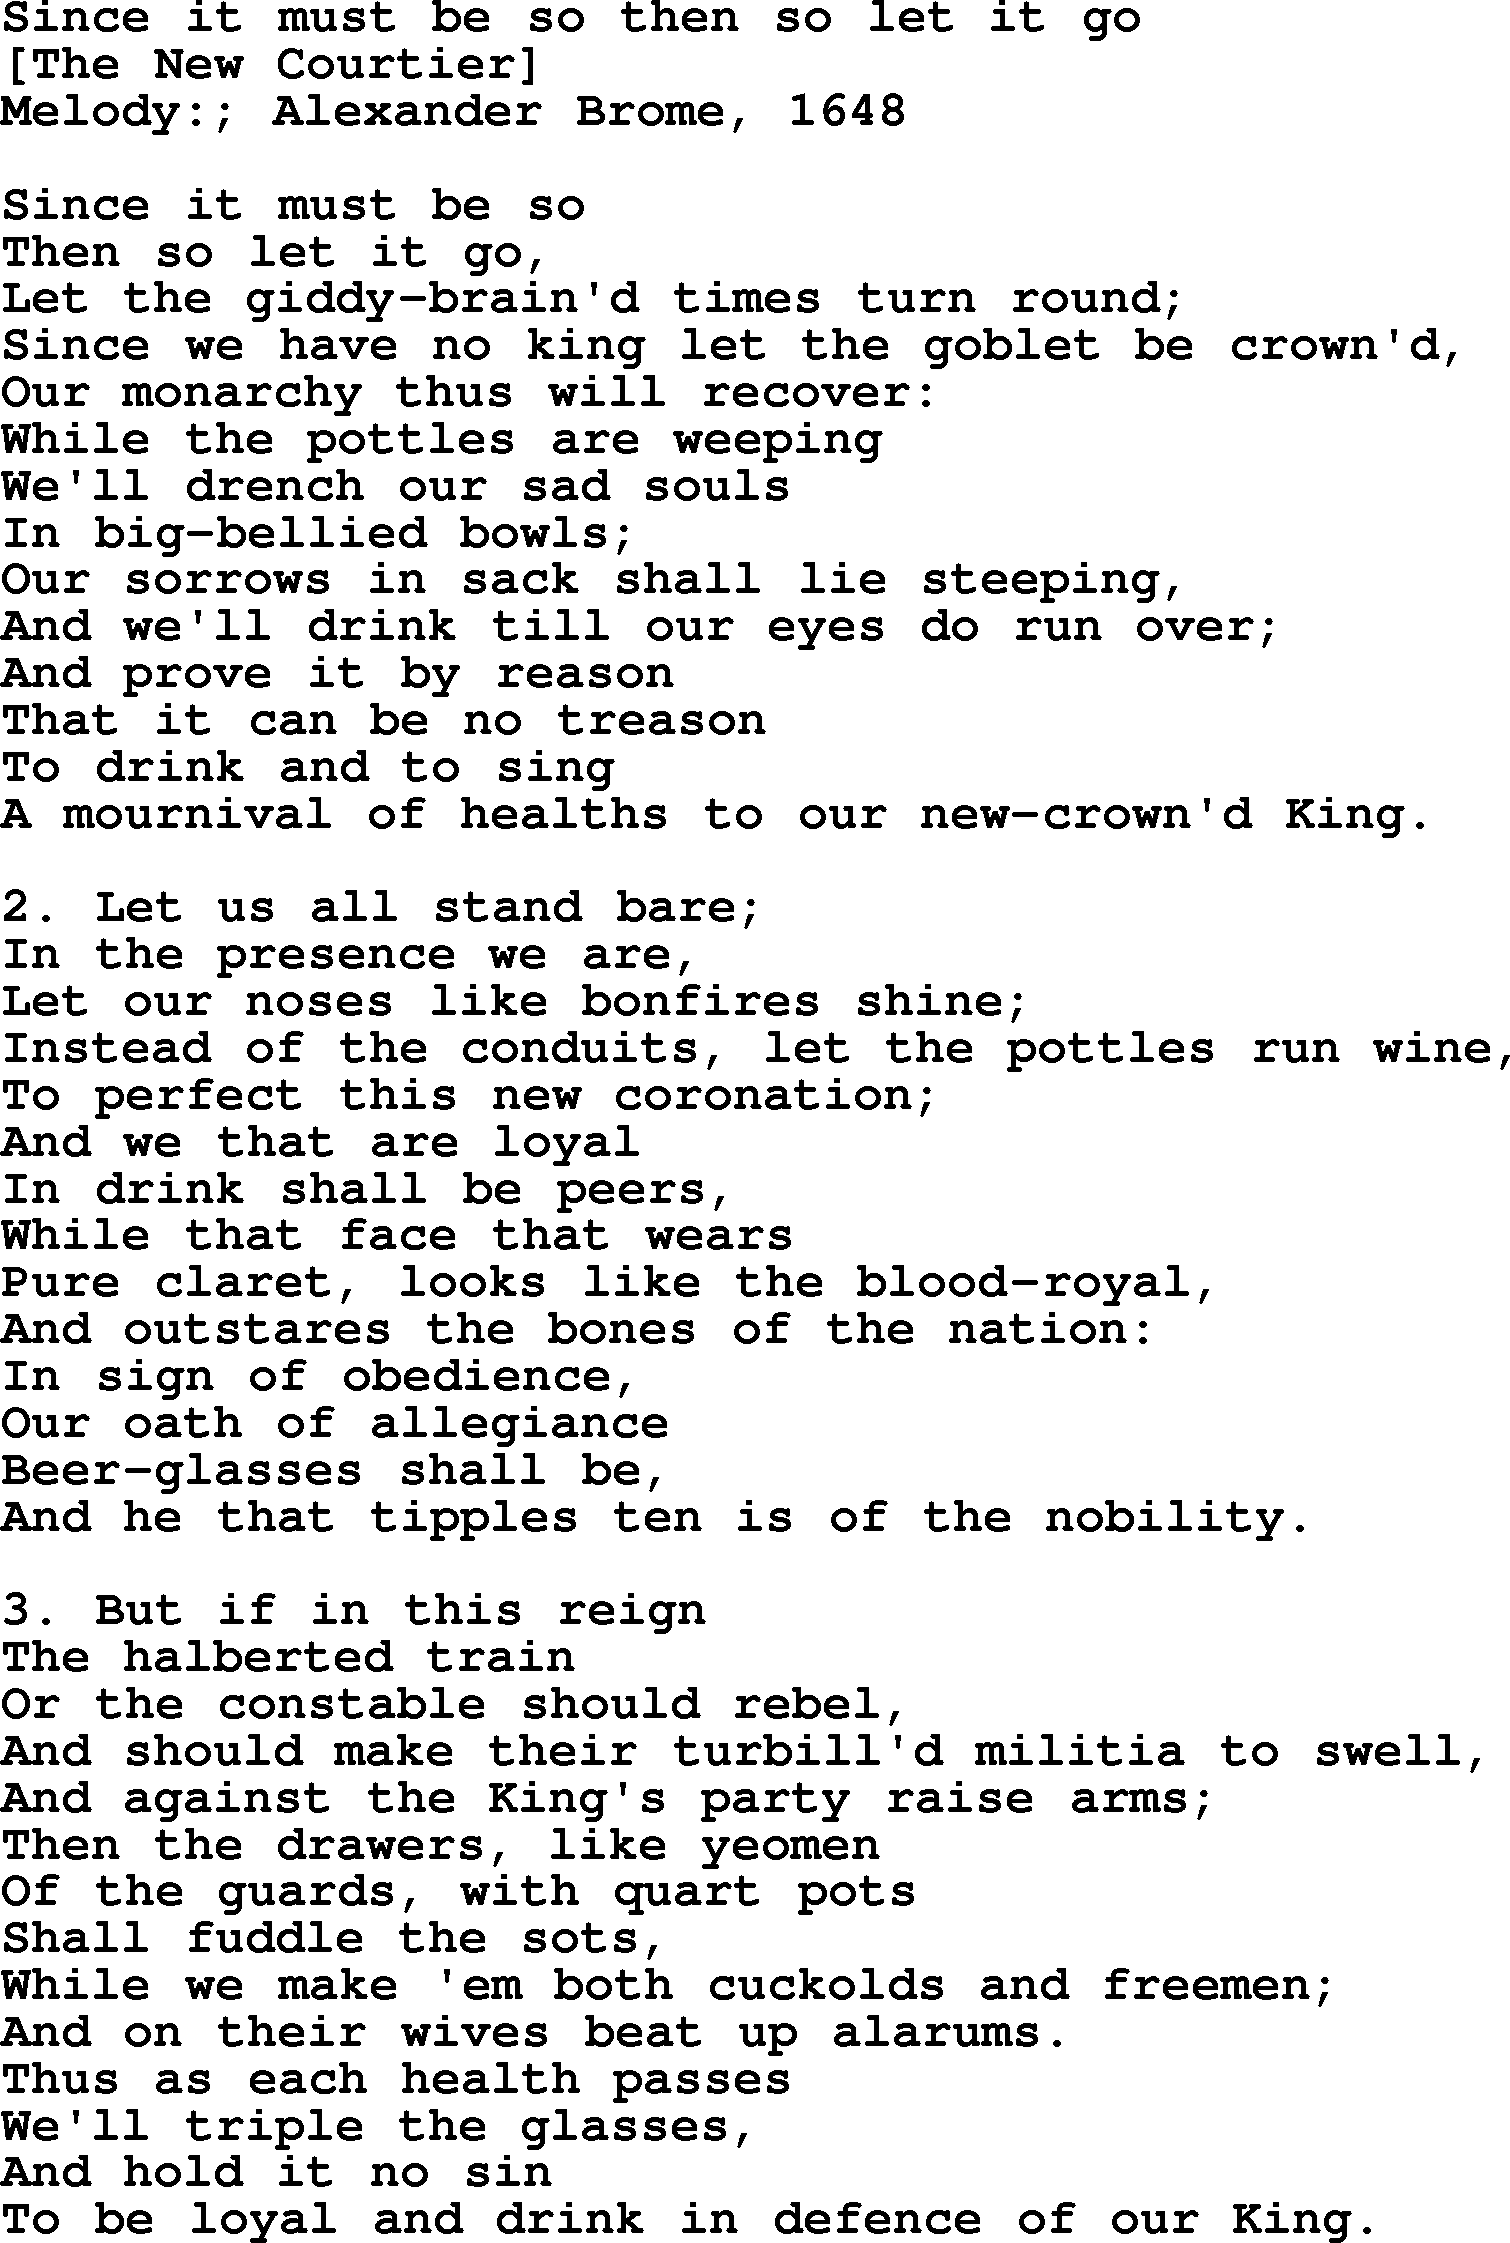 Old English Song: Since It Must Be So Then So Let It Go lyrics